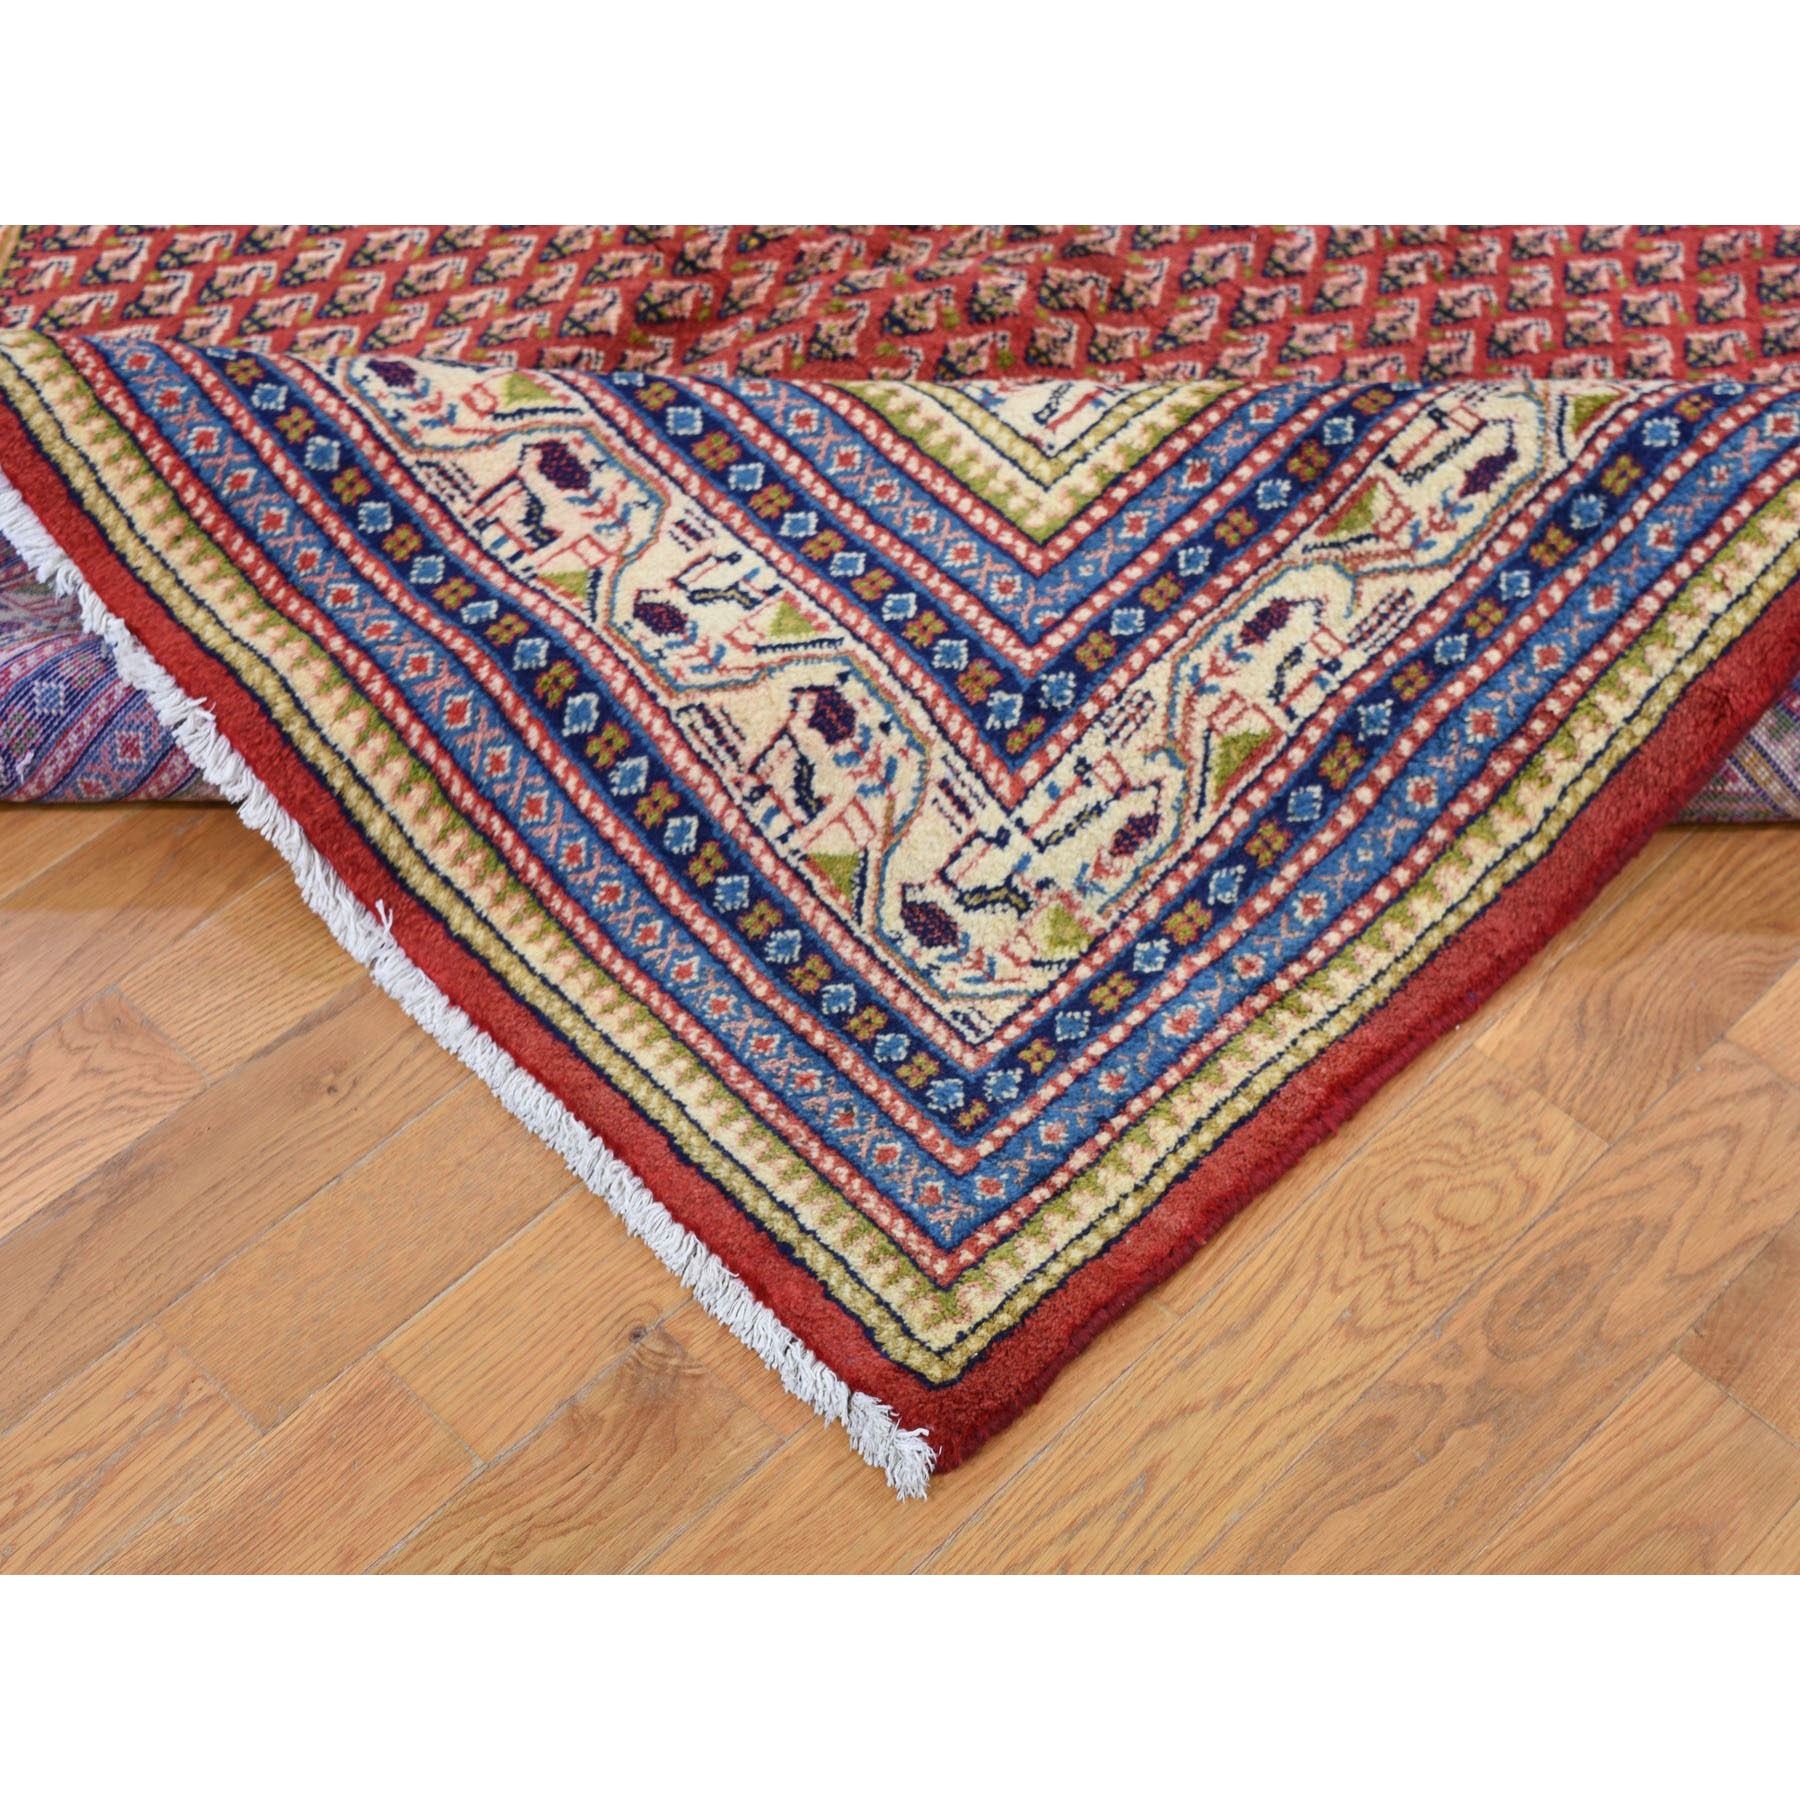 6'7"x10'2" Red New Persian Sarouk Mir Full Pile Pure Wool Small Design Hand Woven Oriental Rug 